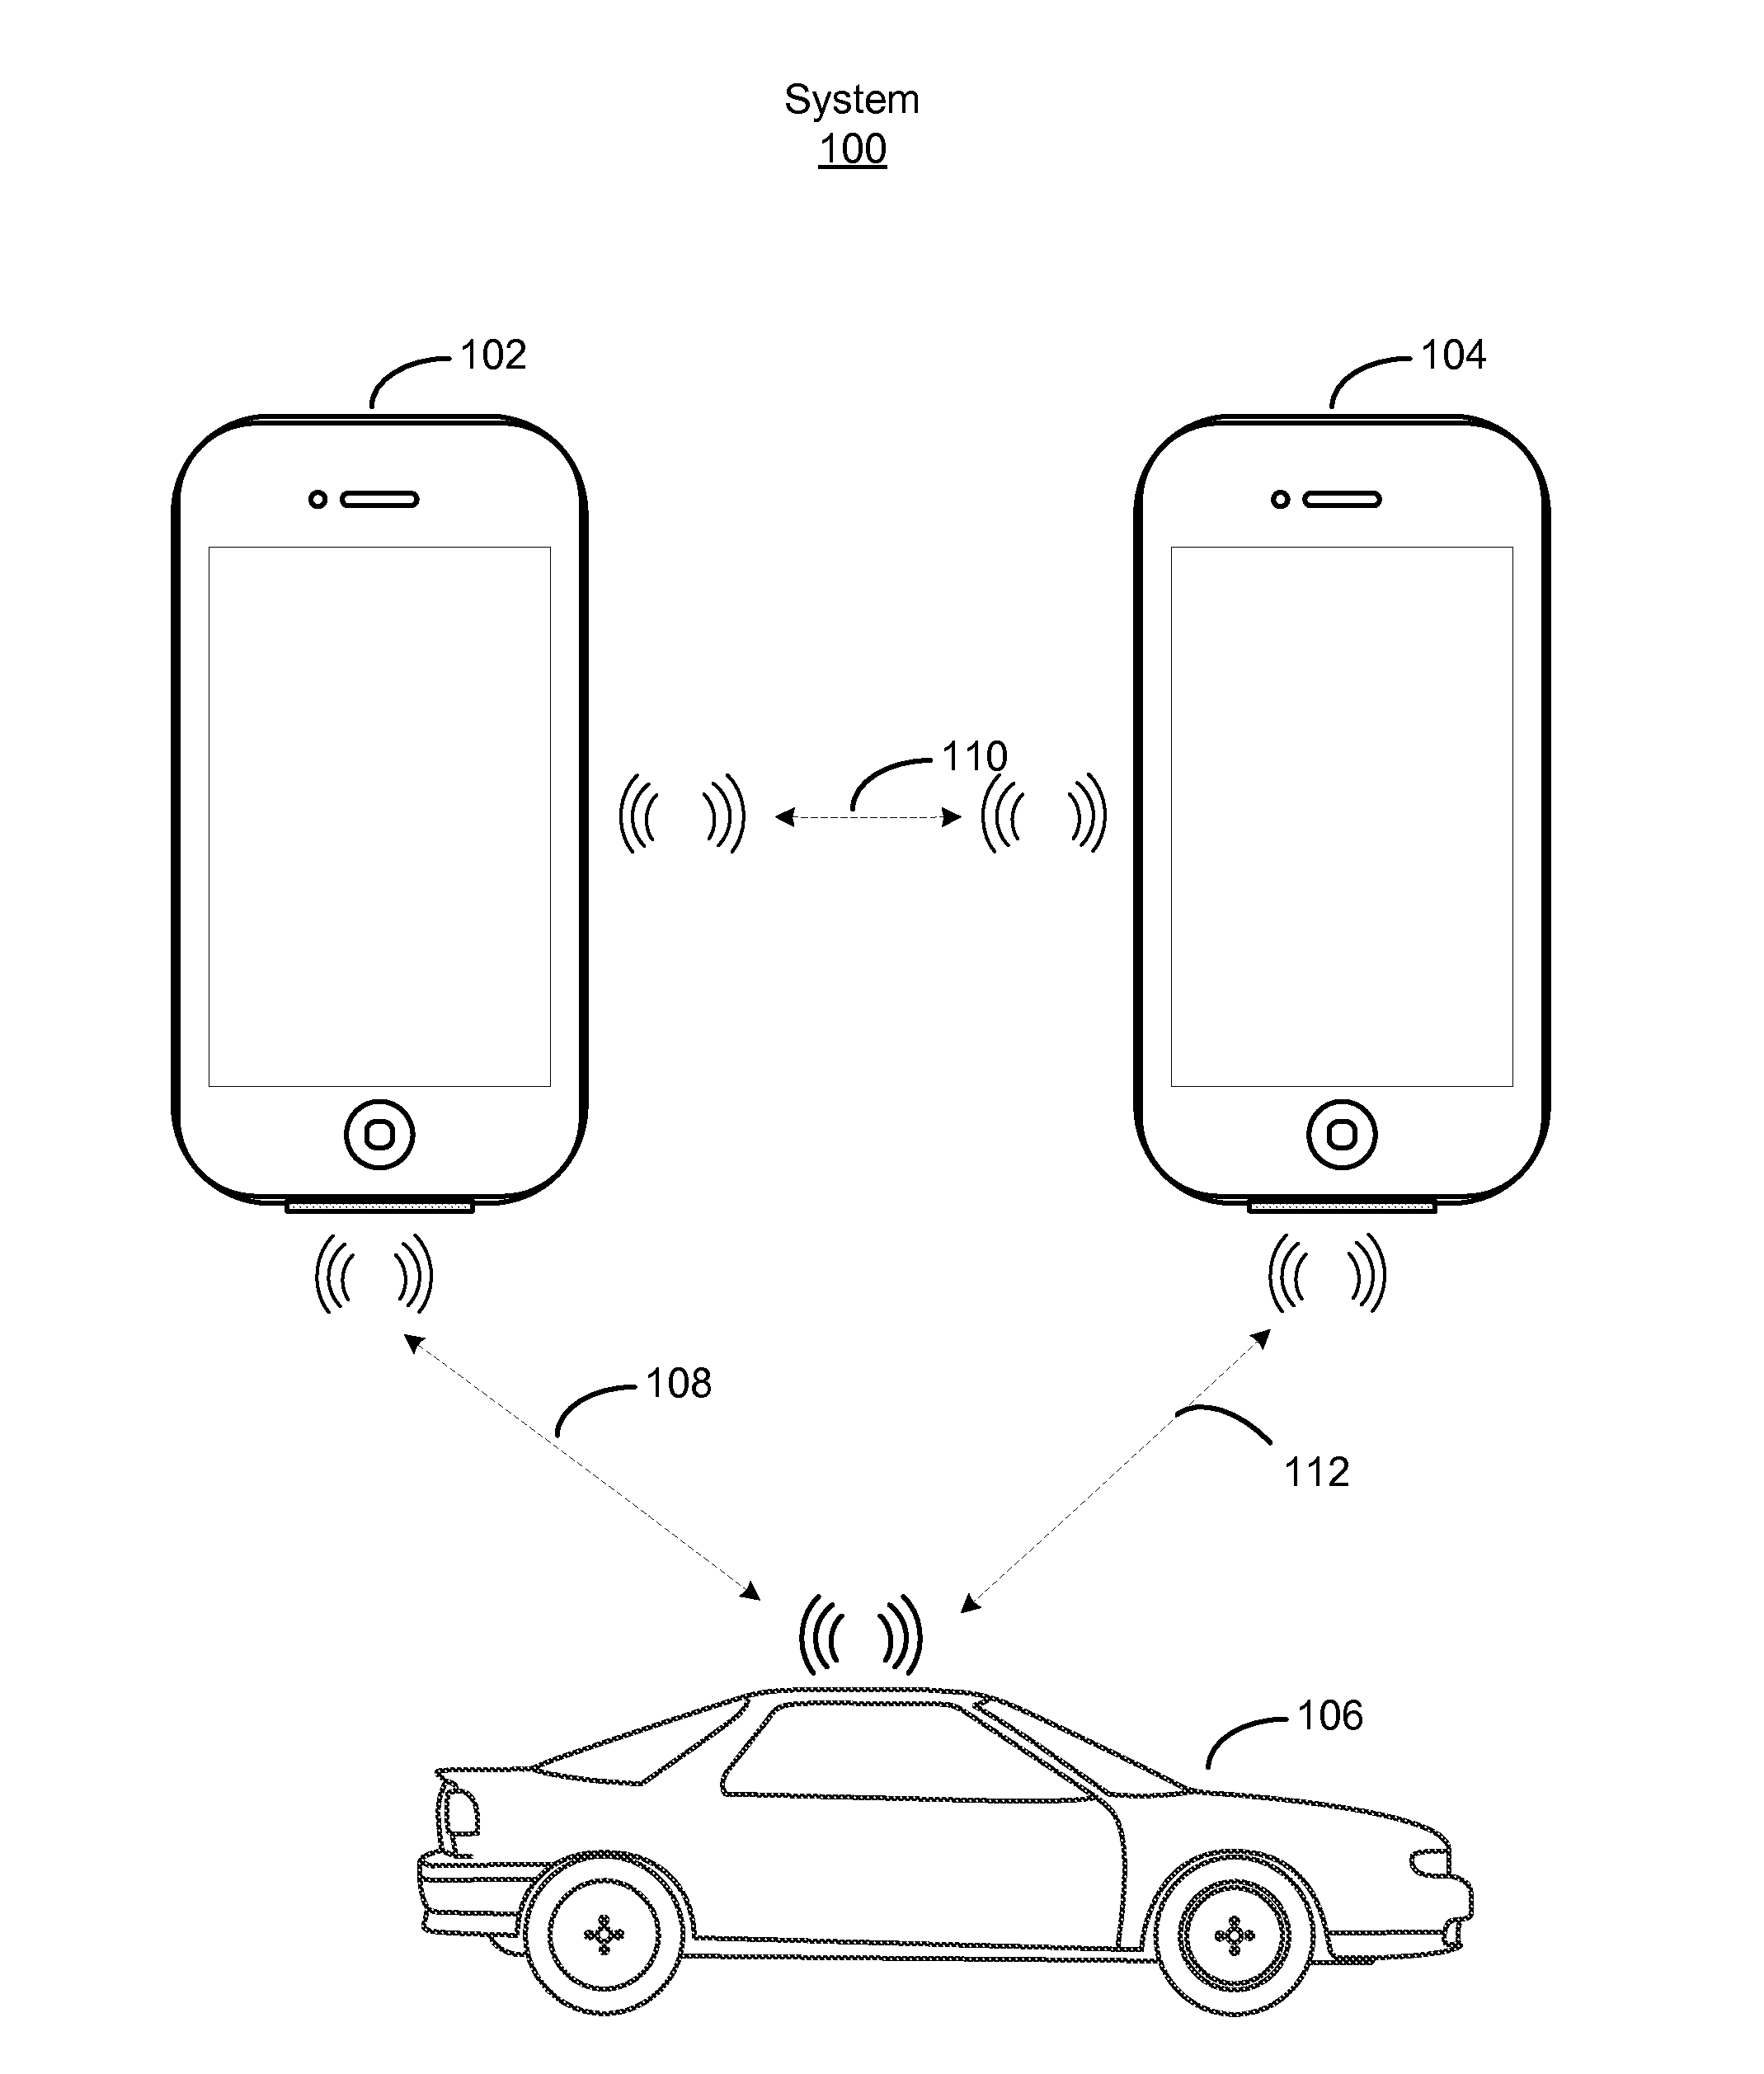 Accessing a vehicle using portable devices